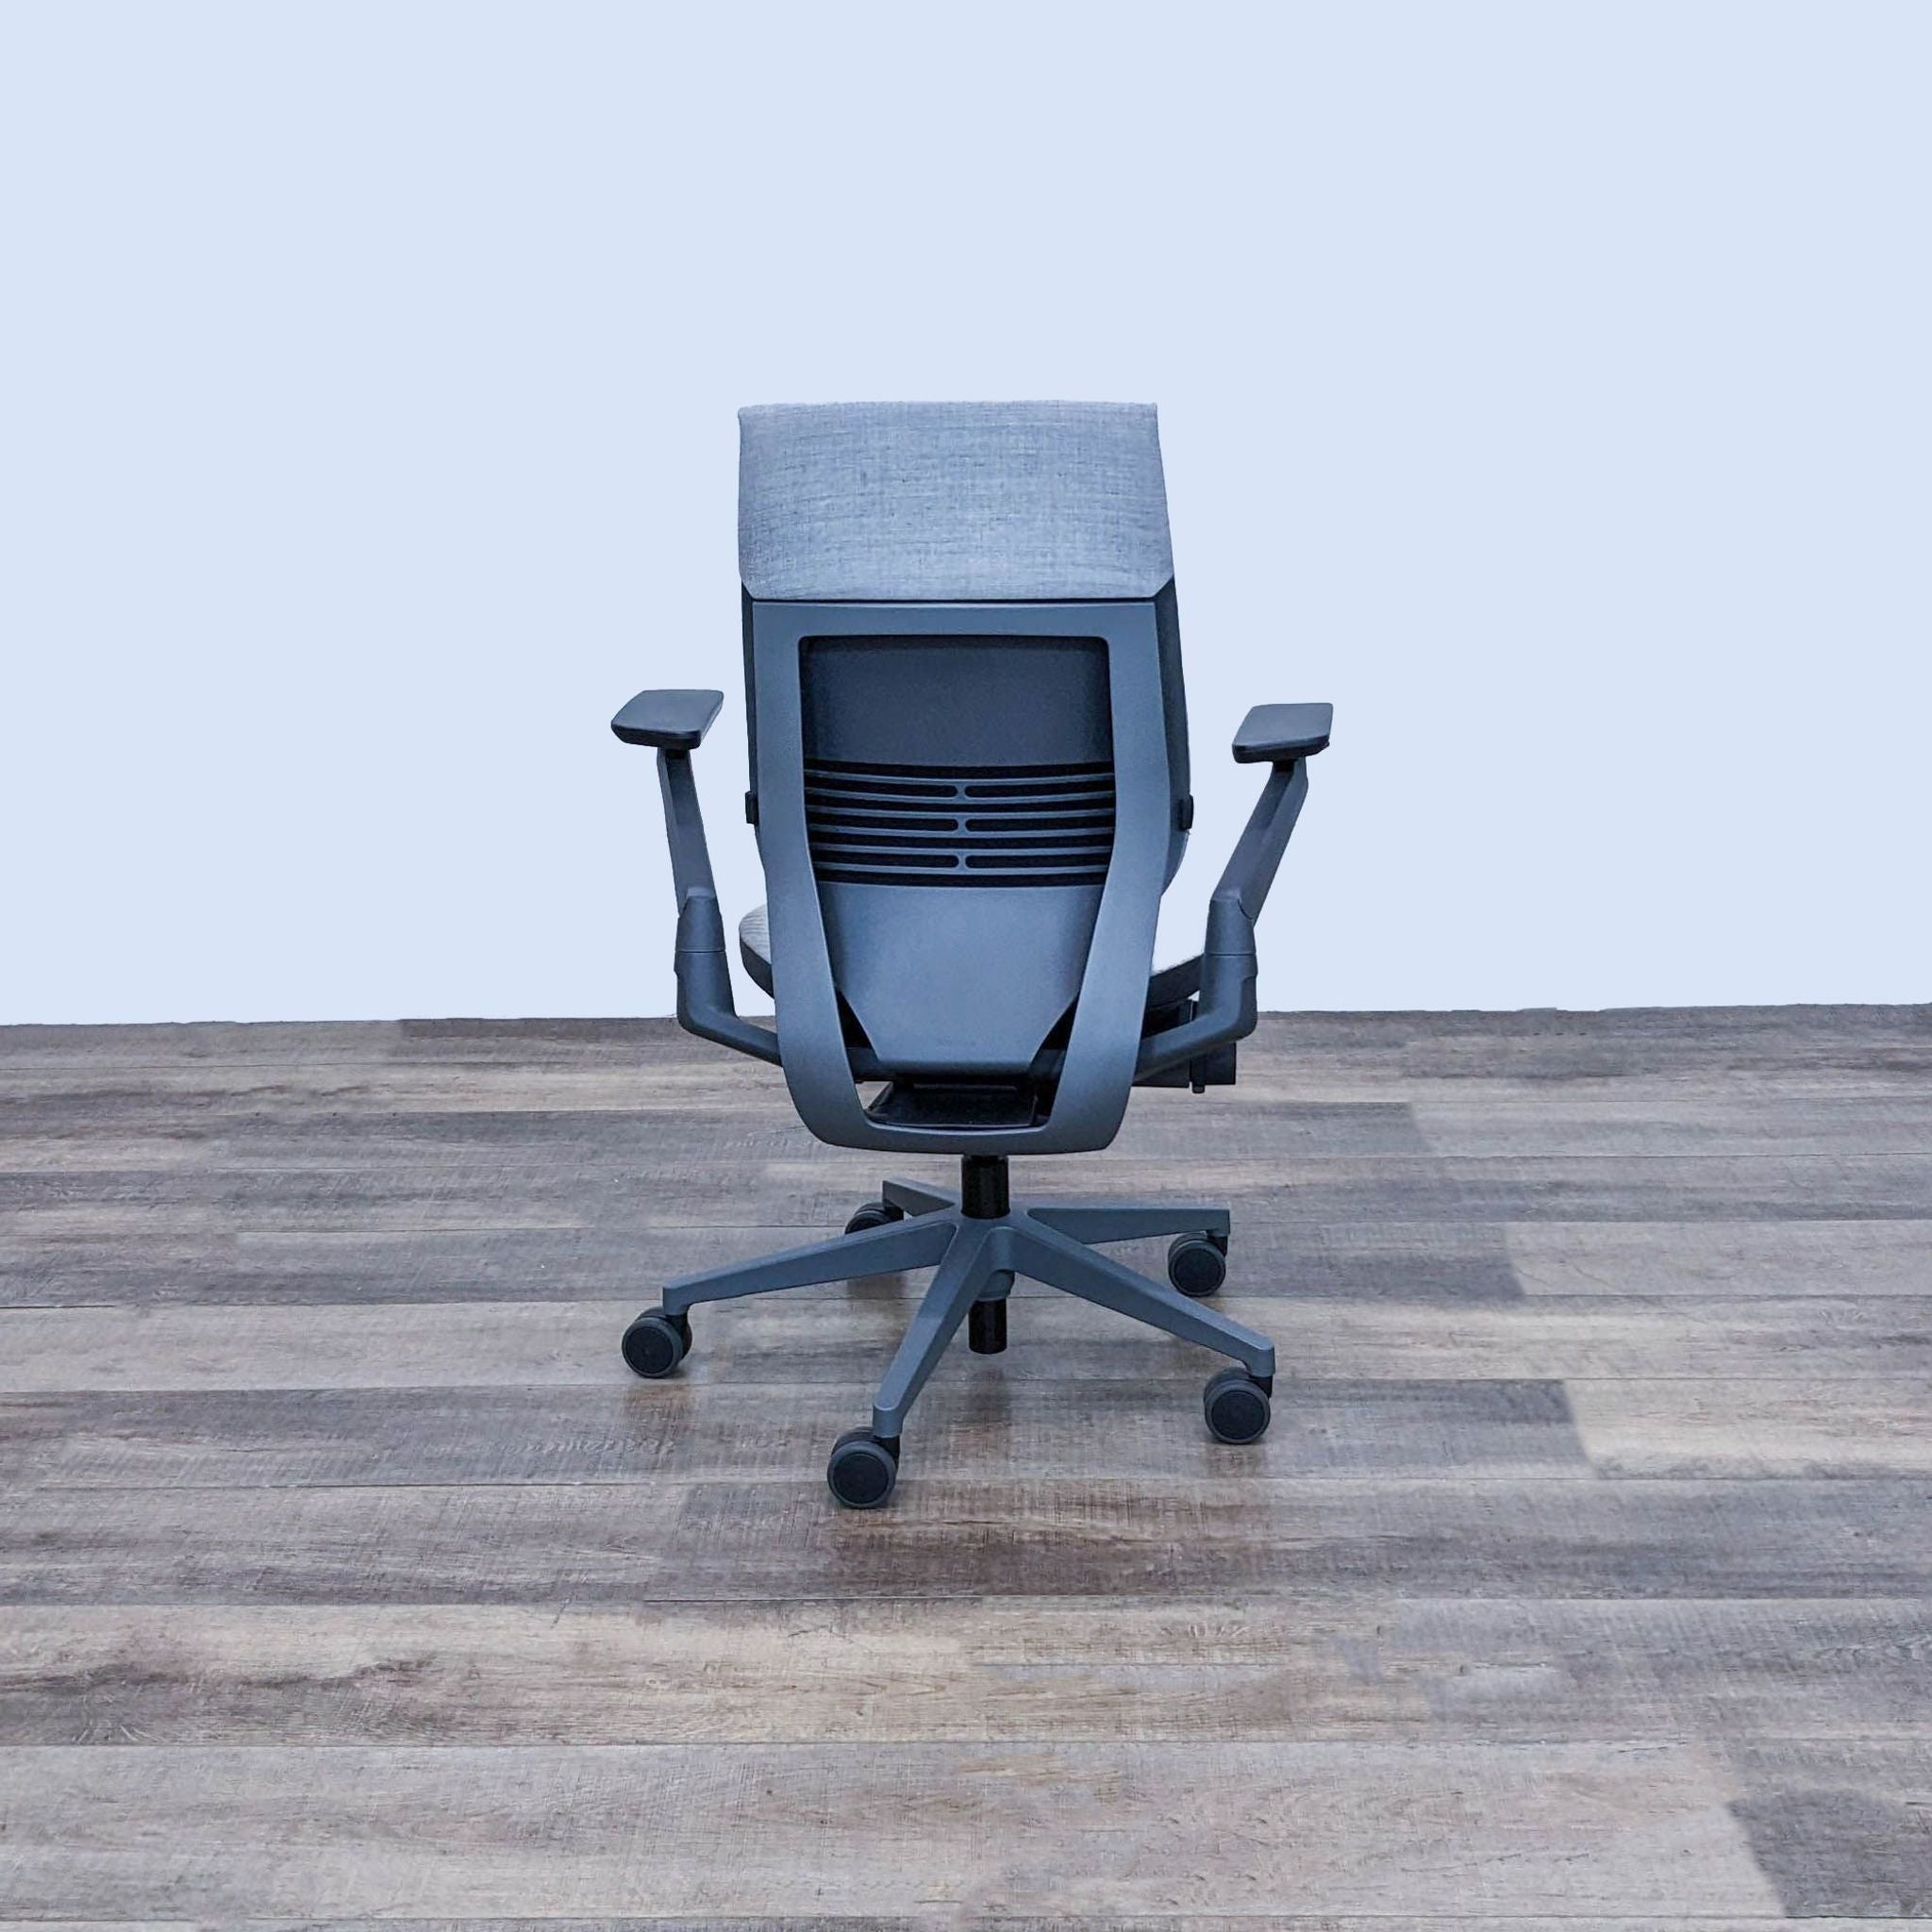 A rear view of a Steelcase Gesture chair showcasing the shell back, 4-position recline lock, and wheels suitable for hard flooring.